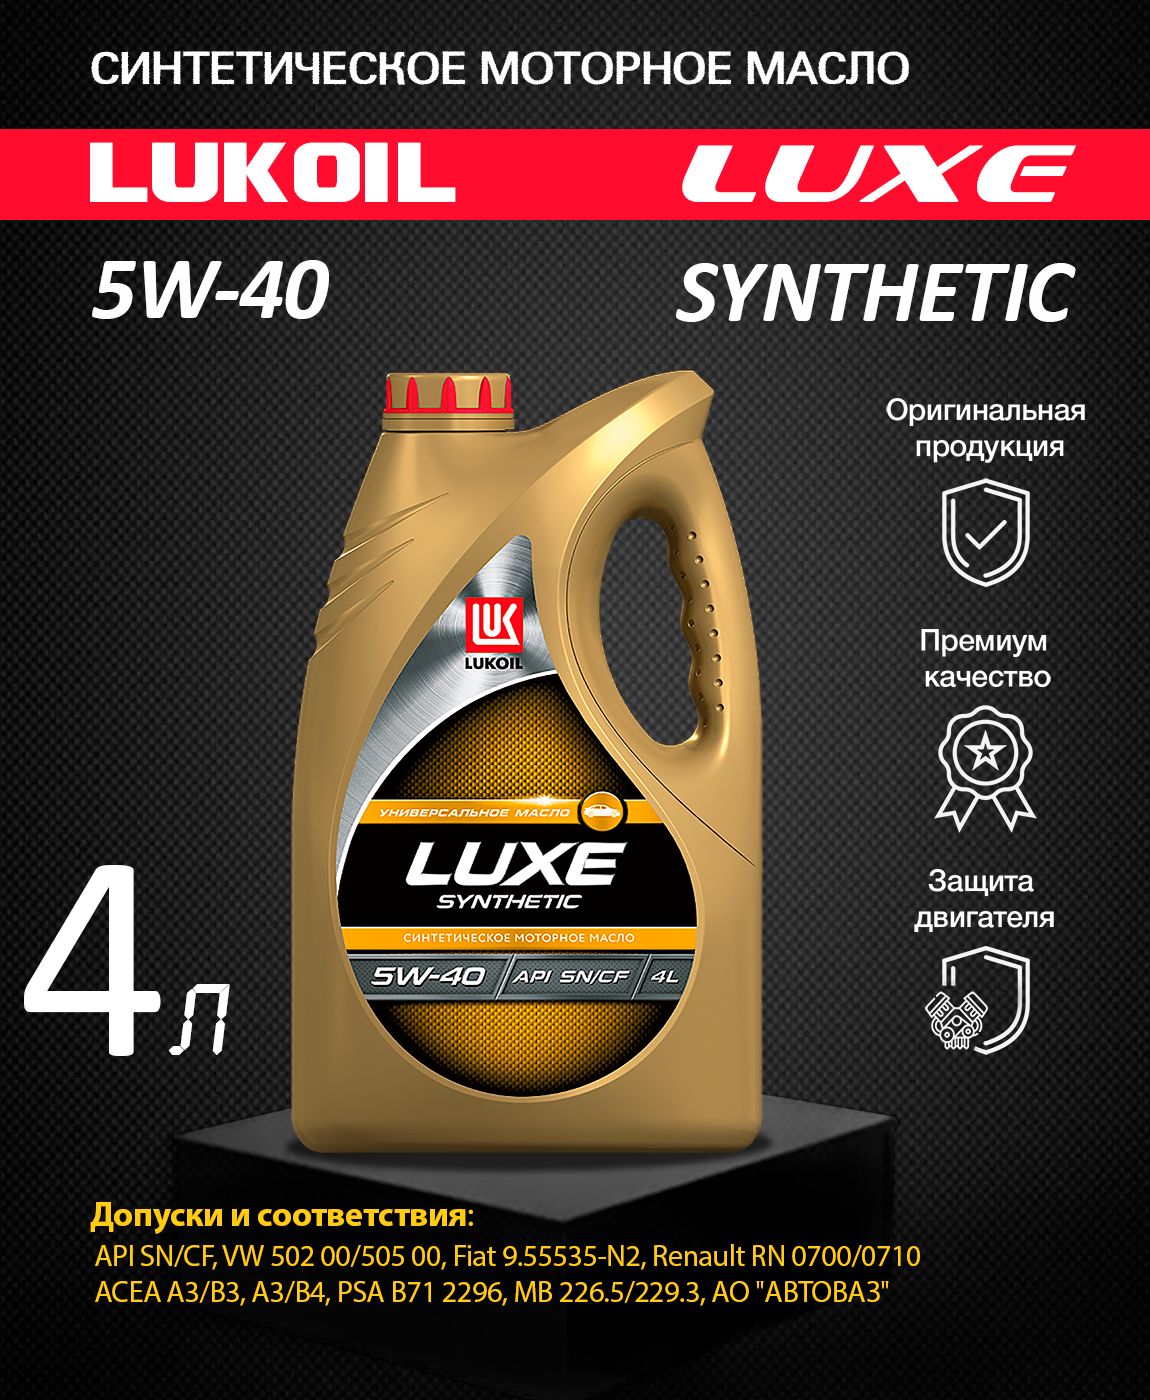 Масло лукойл люкс 5w40 отзывы. Lukoil Luxe Synthetic 5w-40. Lukoil Luxe Synthetic 5w-40 (ACEA a3/b4-08; API SM/CF). 207465 Лукойл. Автозаправка Лукойл.